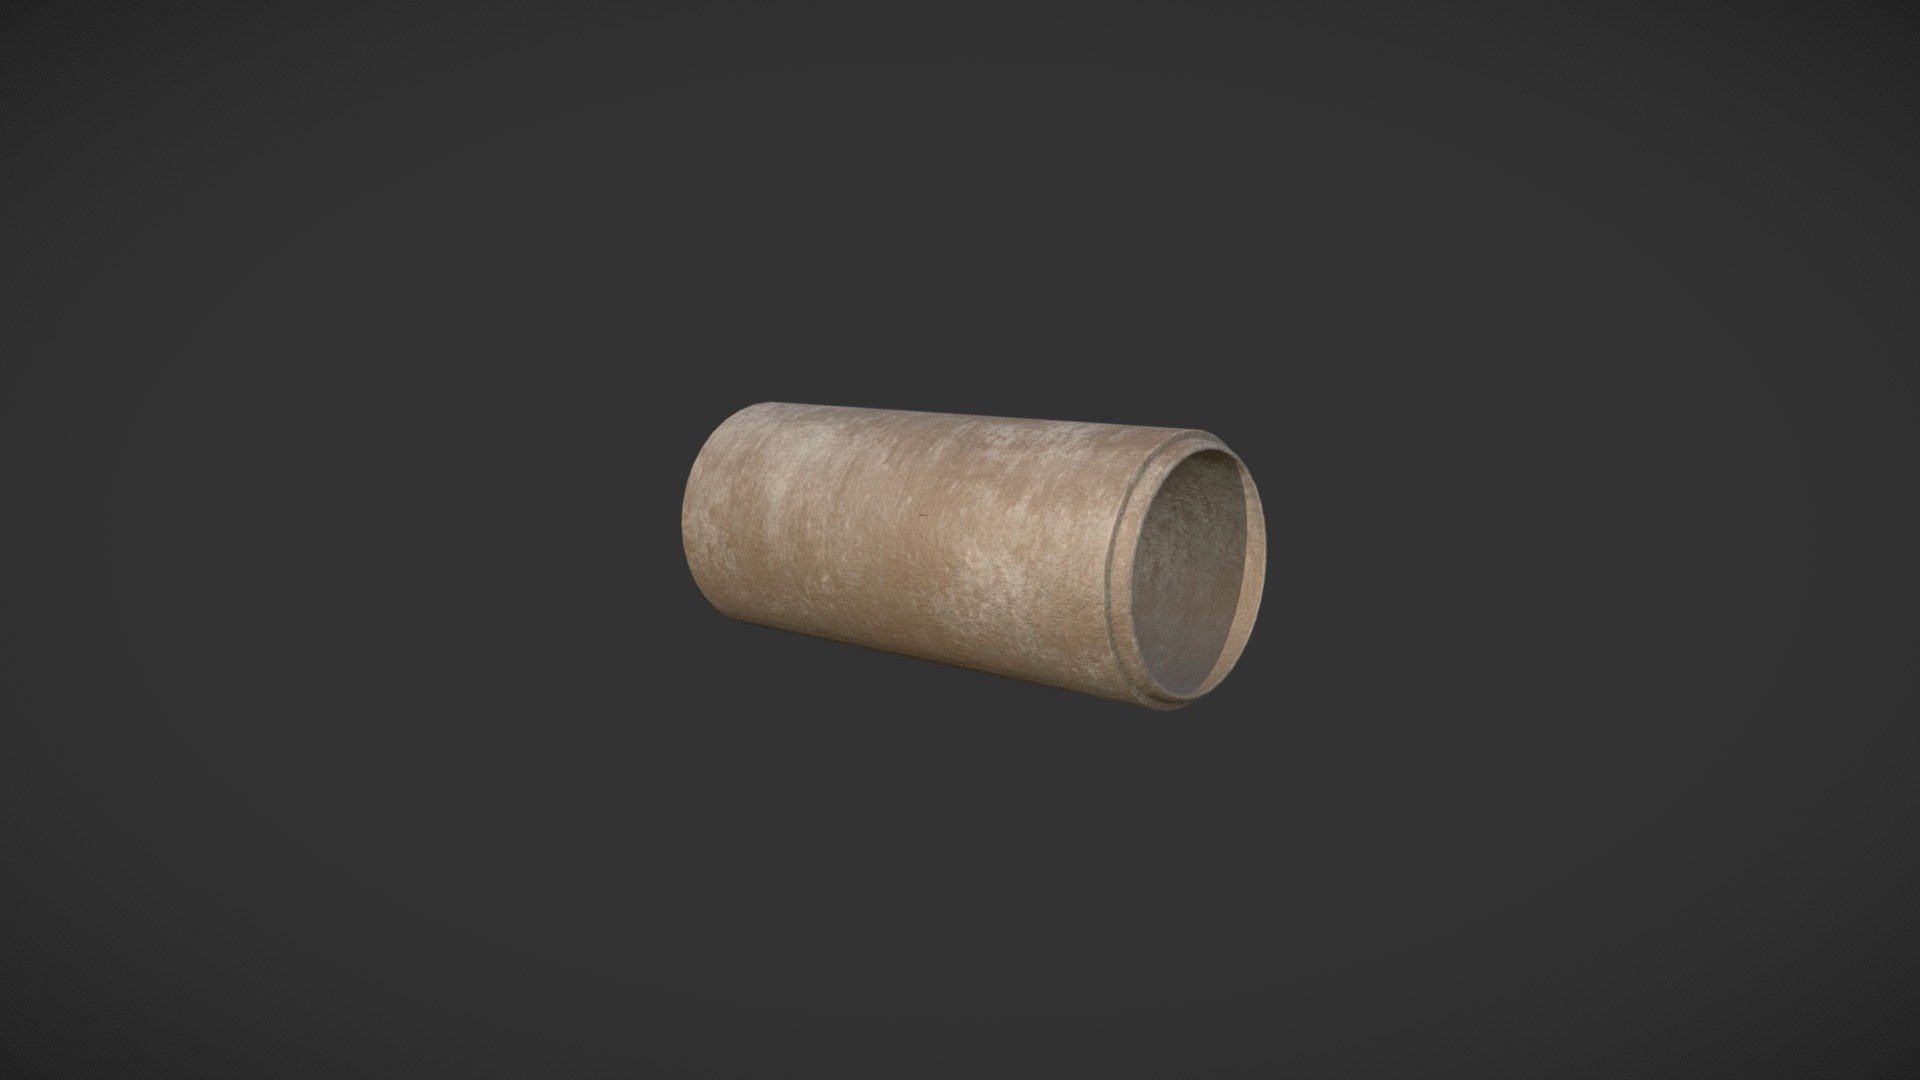 Game/VR/AR-ready low-poly model of a precast dirty concrete pipe with 4K PBR-textures that is built to real-world scale (metric system).

Precast concrete elements are used extensively in the construction business and models such as this one are useful when designing urban areas, especially when creating ruined settings.

The model and PBR-textures are prepared for use with Unity and Unreal Engine, but can easily be adapted to other game engines, or for other uses. The model was created using Blender and Substance Painter.

The zip-file “Dirty concrete pipe.zip” contains all the textures as png-files (8 bits), as well as the model in the following formats:

FBX 7.4 (.fbx)

OBJ 3.0 (.obj and .mtl)

Collada 1.4.1 (.dae)

Blender 4.0.2 (.blend)  

The zip-file also includes fbx-versions of the model and textures specially made for use with Unreal Engine and Unity.

The same model with a clean texture can be found here:
https://sketchfab.com/3d-models/concrete-pipe-196ad587e9b04ddc962e3247e3fe246d - Dirty concrete pipe - Buy Royalty Free 3D model by Vertex-Design 3d model